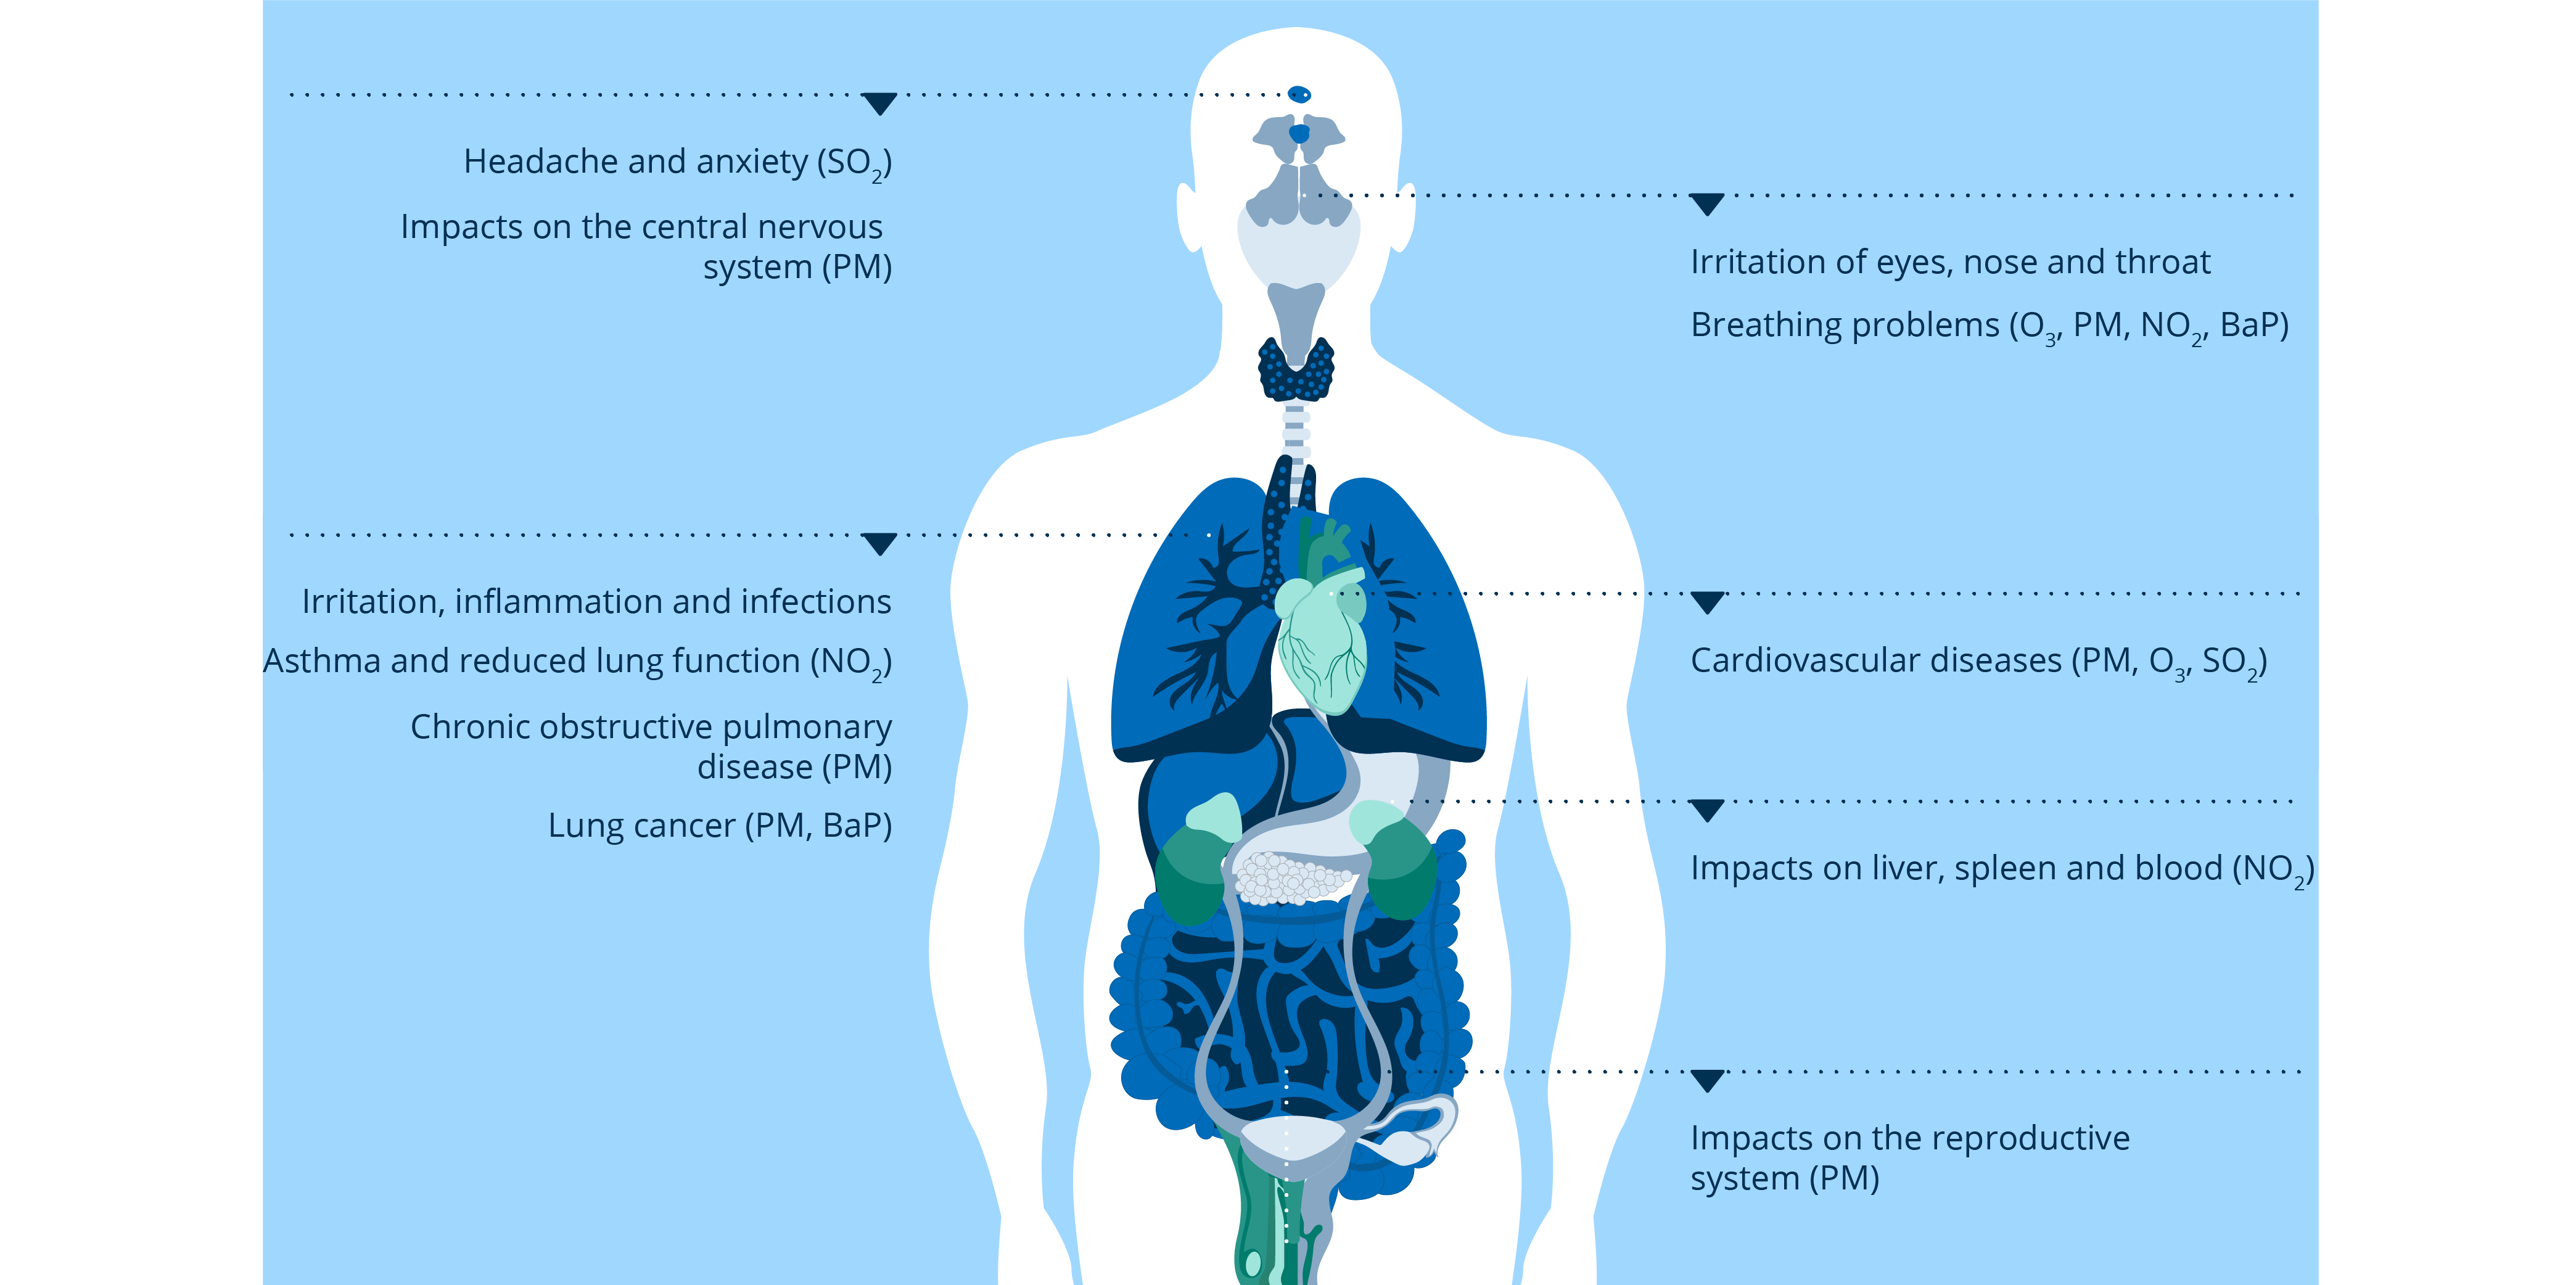 Figure 4. Impacts of air pollution on health